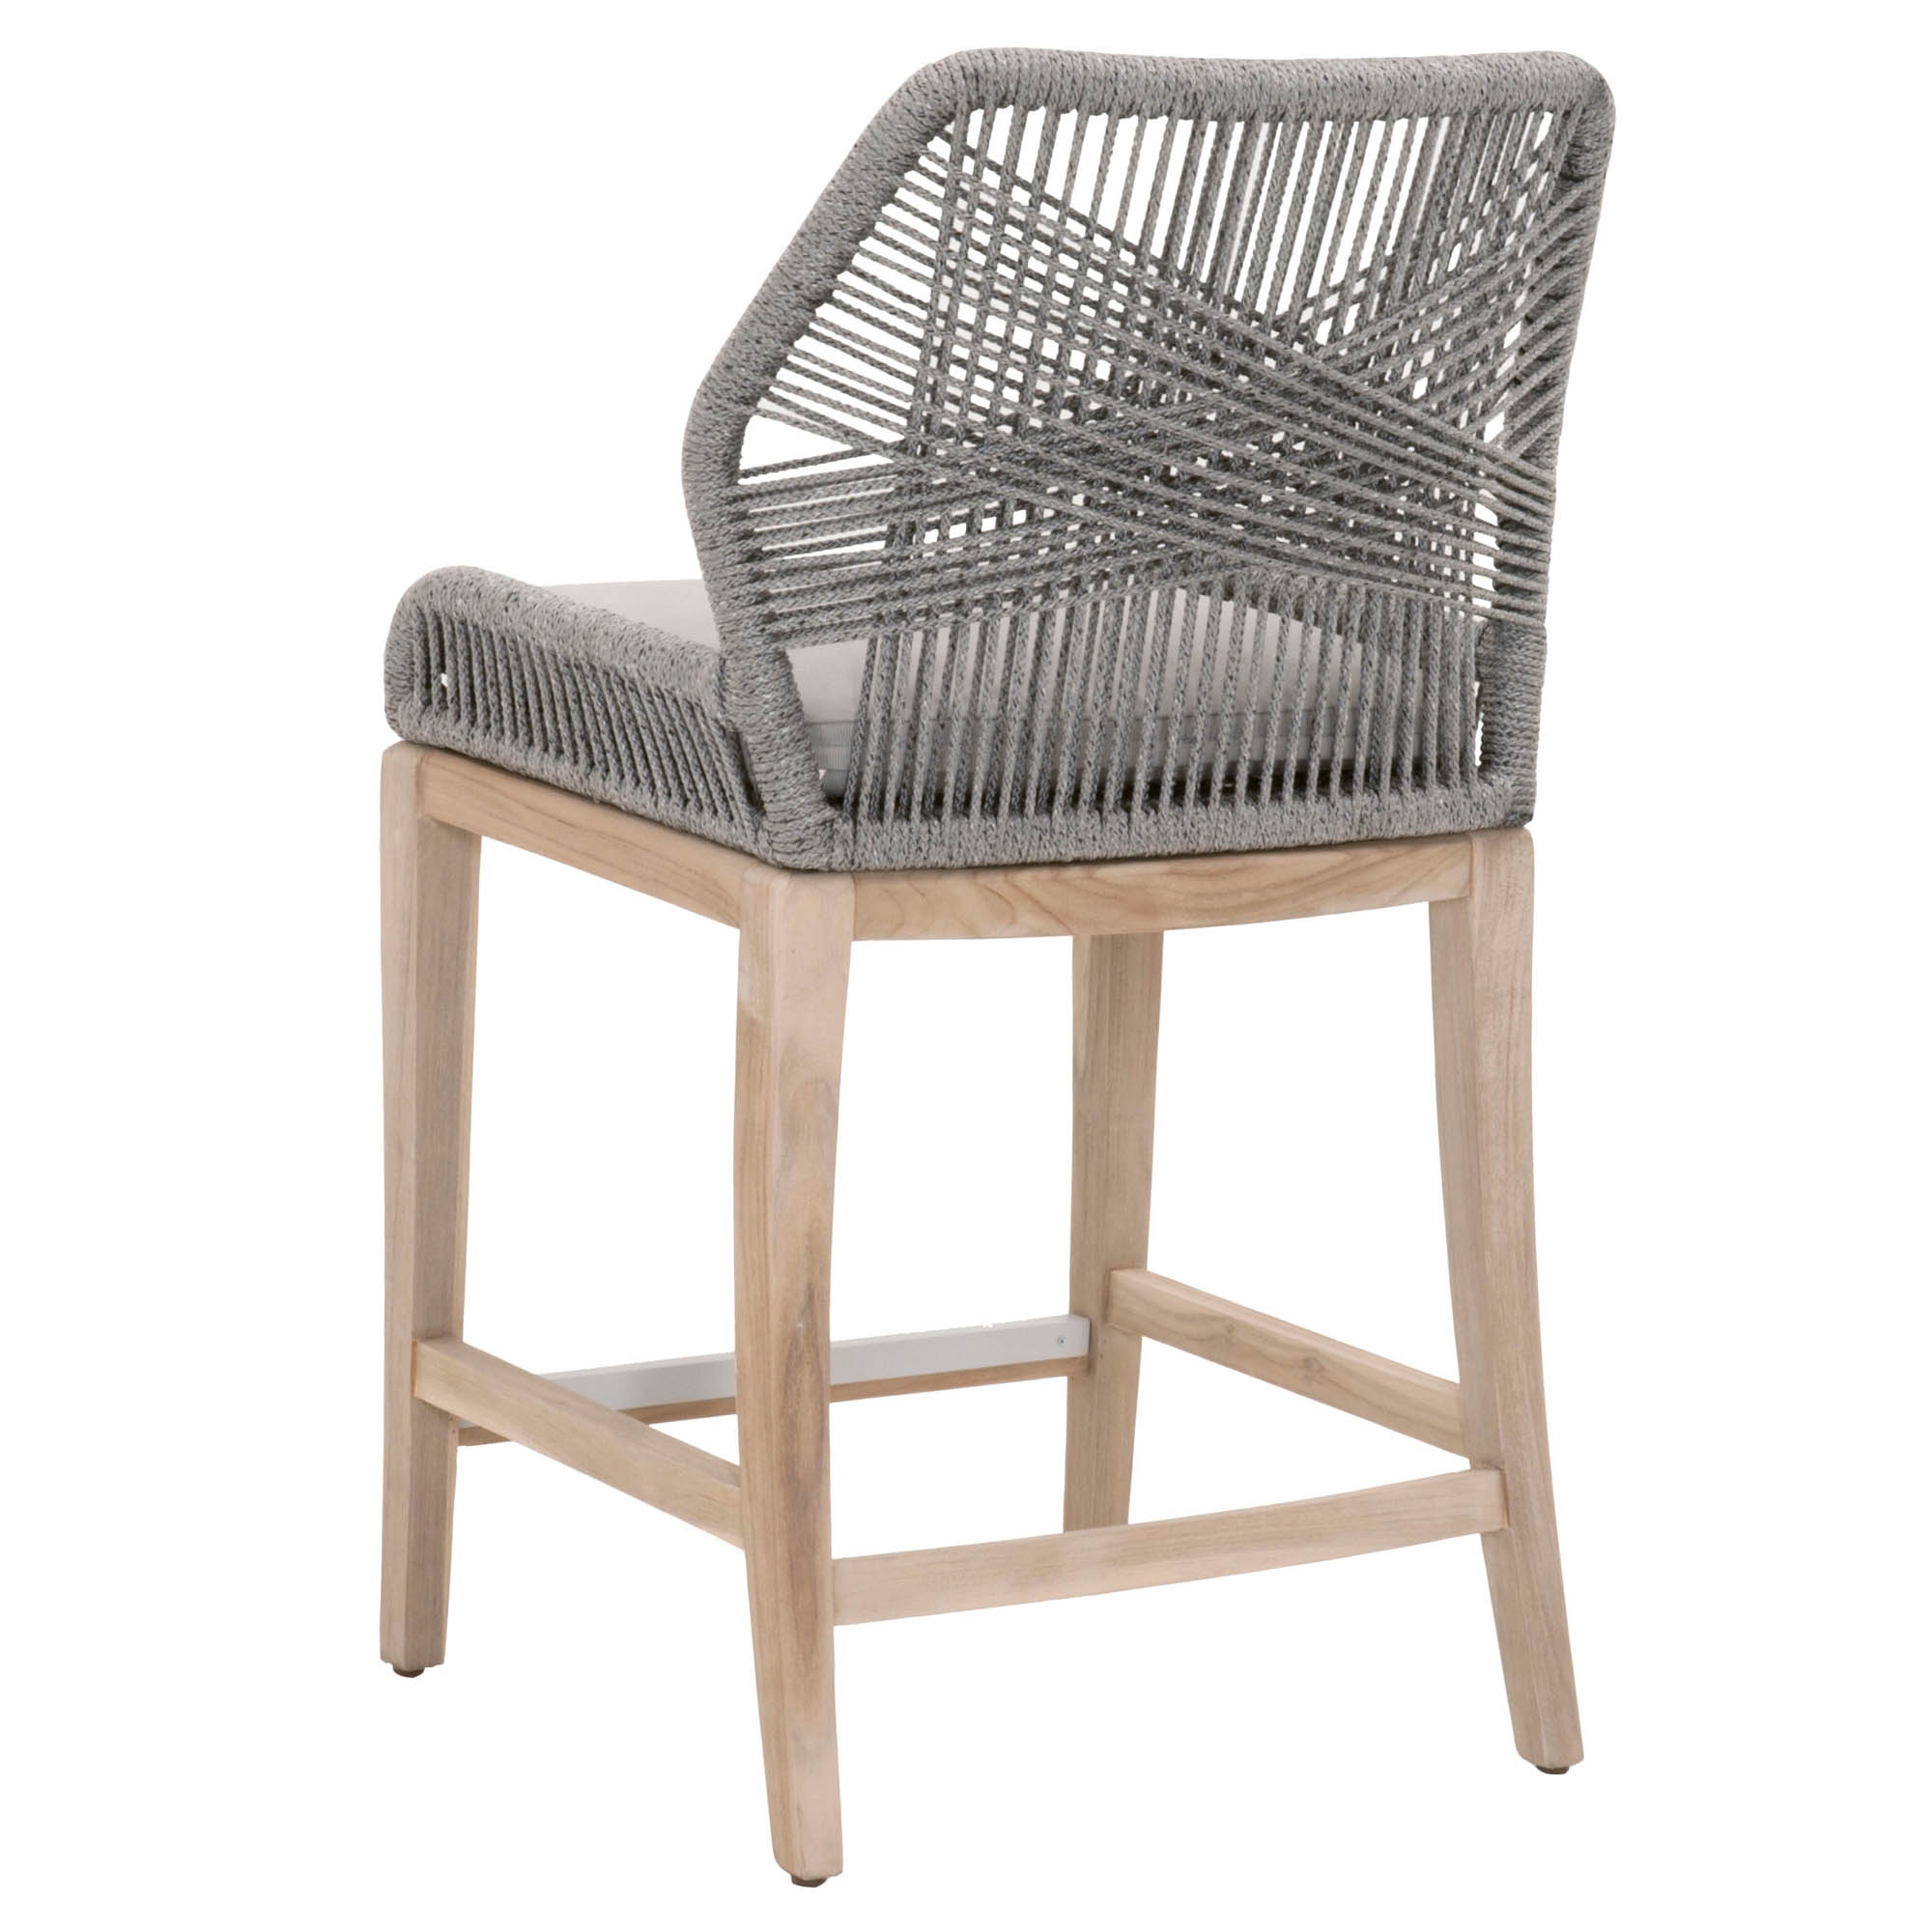 Loom Outdoor Counter Stool - Image 3